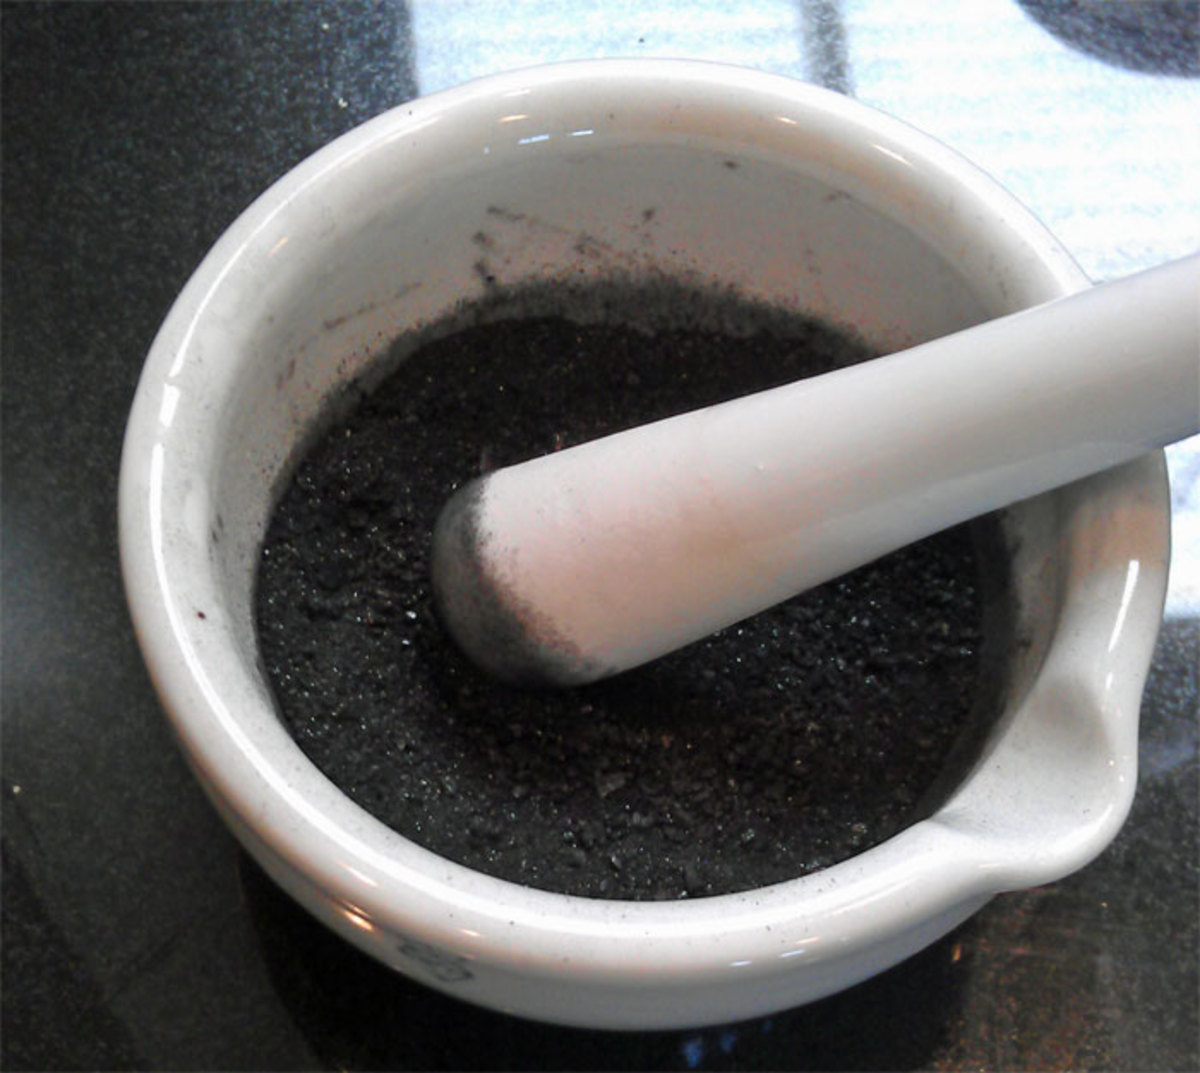 Grind the charcoal into powder.